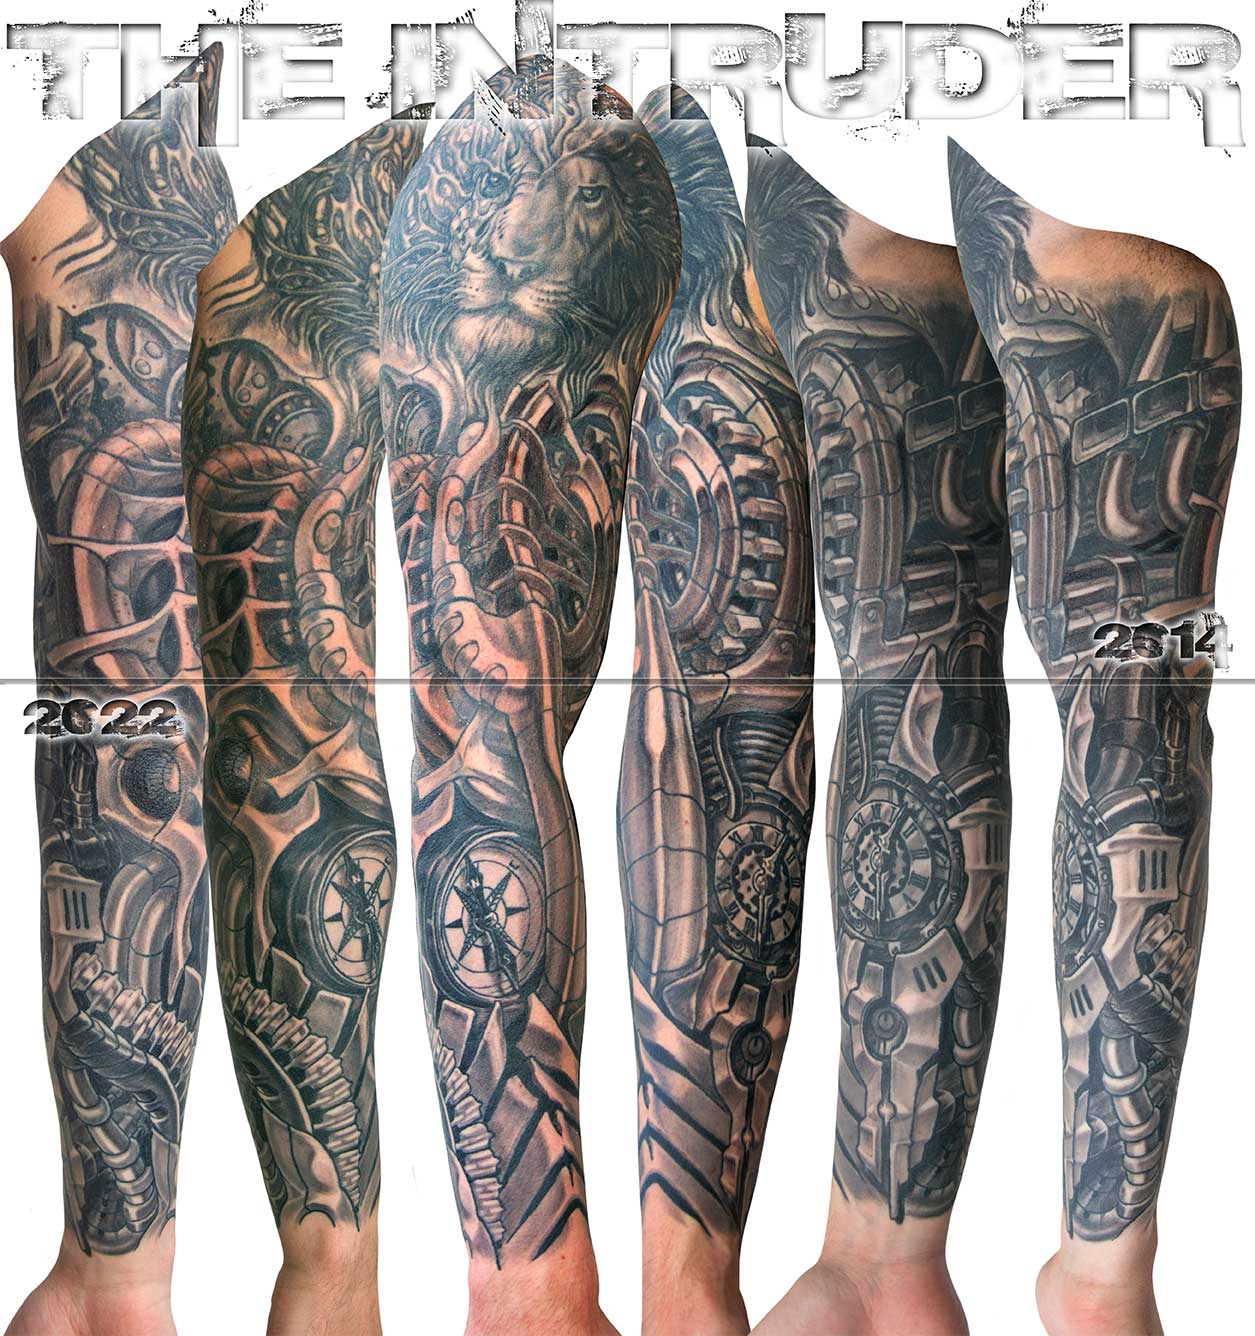 Amazon.com: NaNzu 10 Sheets Large Full Sleeve Temporary Tattoos for Women  and Man - Waterproof & Long Lasting - Full Arm Sleeve Tattoo Designs - Fake Sleeve  Tattoos for a Stylish Look :